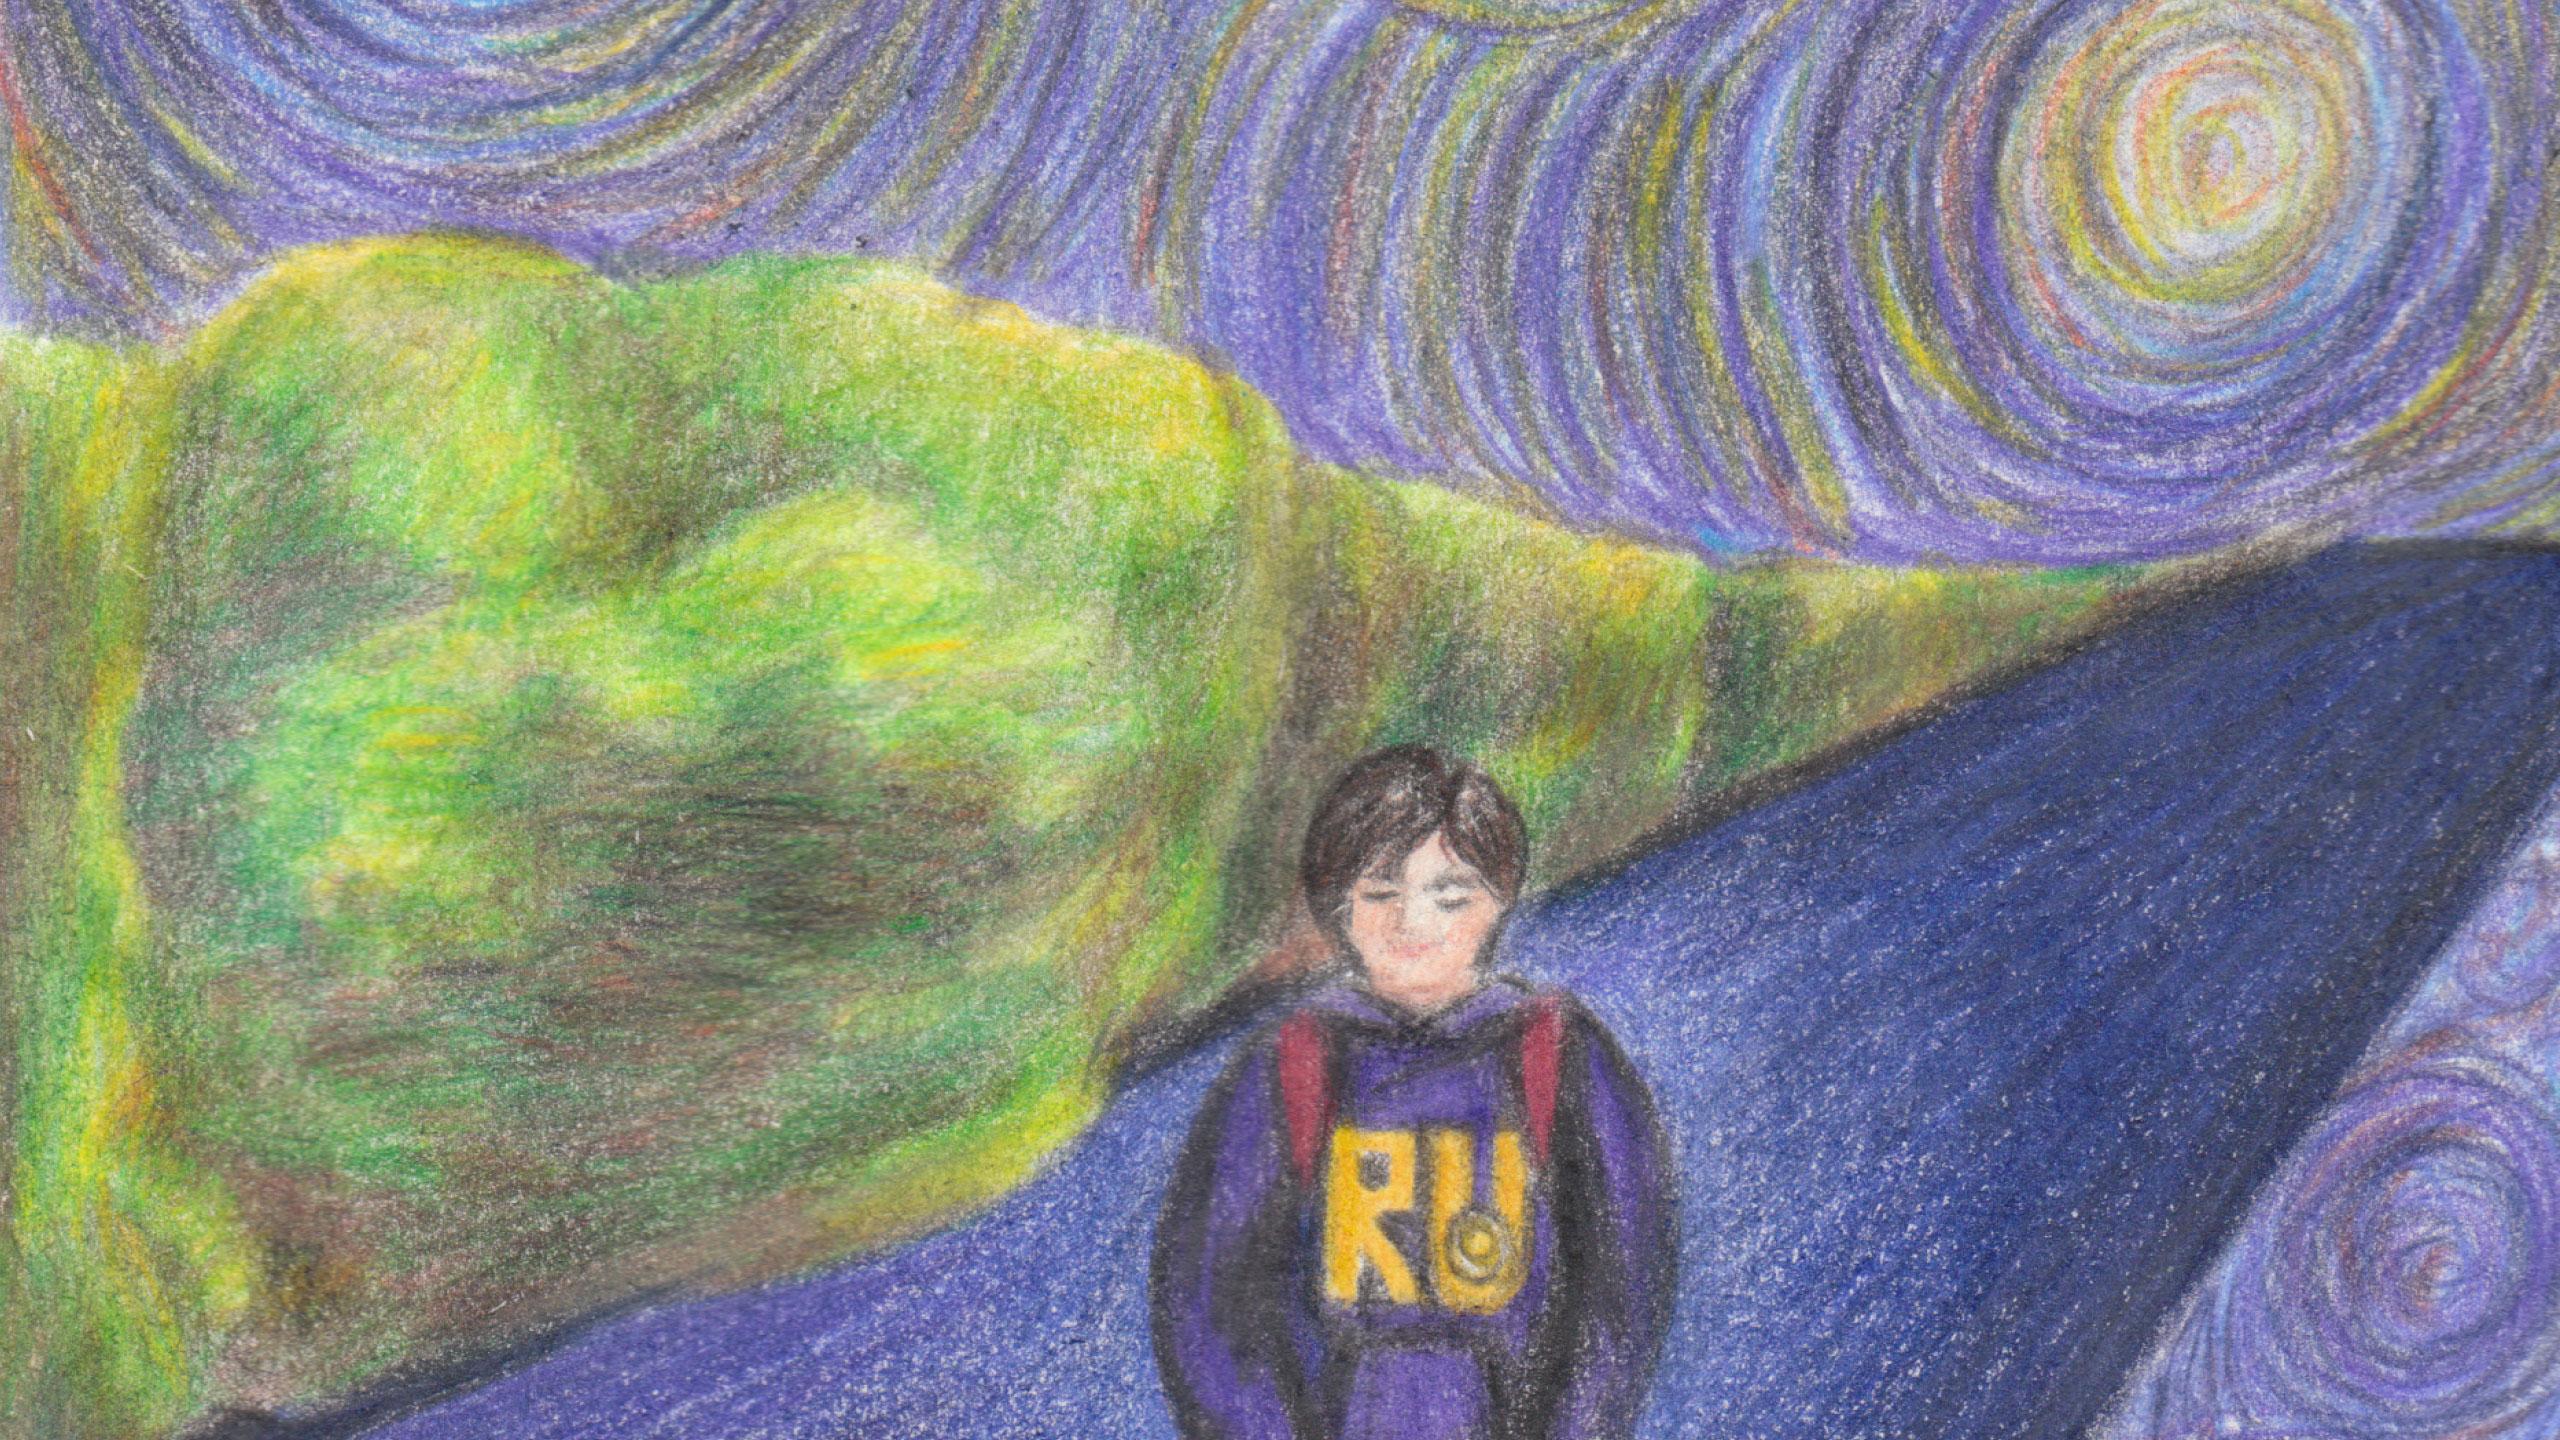 An illustration of a student in a Ryerson sweatshirt walking down an empty street underneath a colourful sky reminiscent of Van Gogh's Starry Night